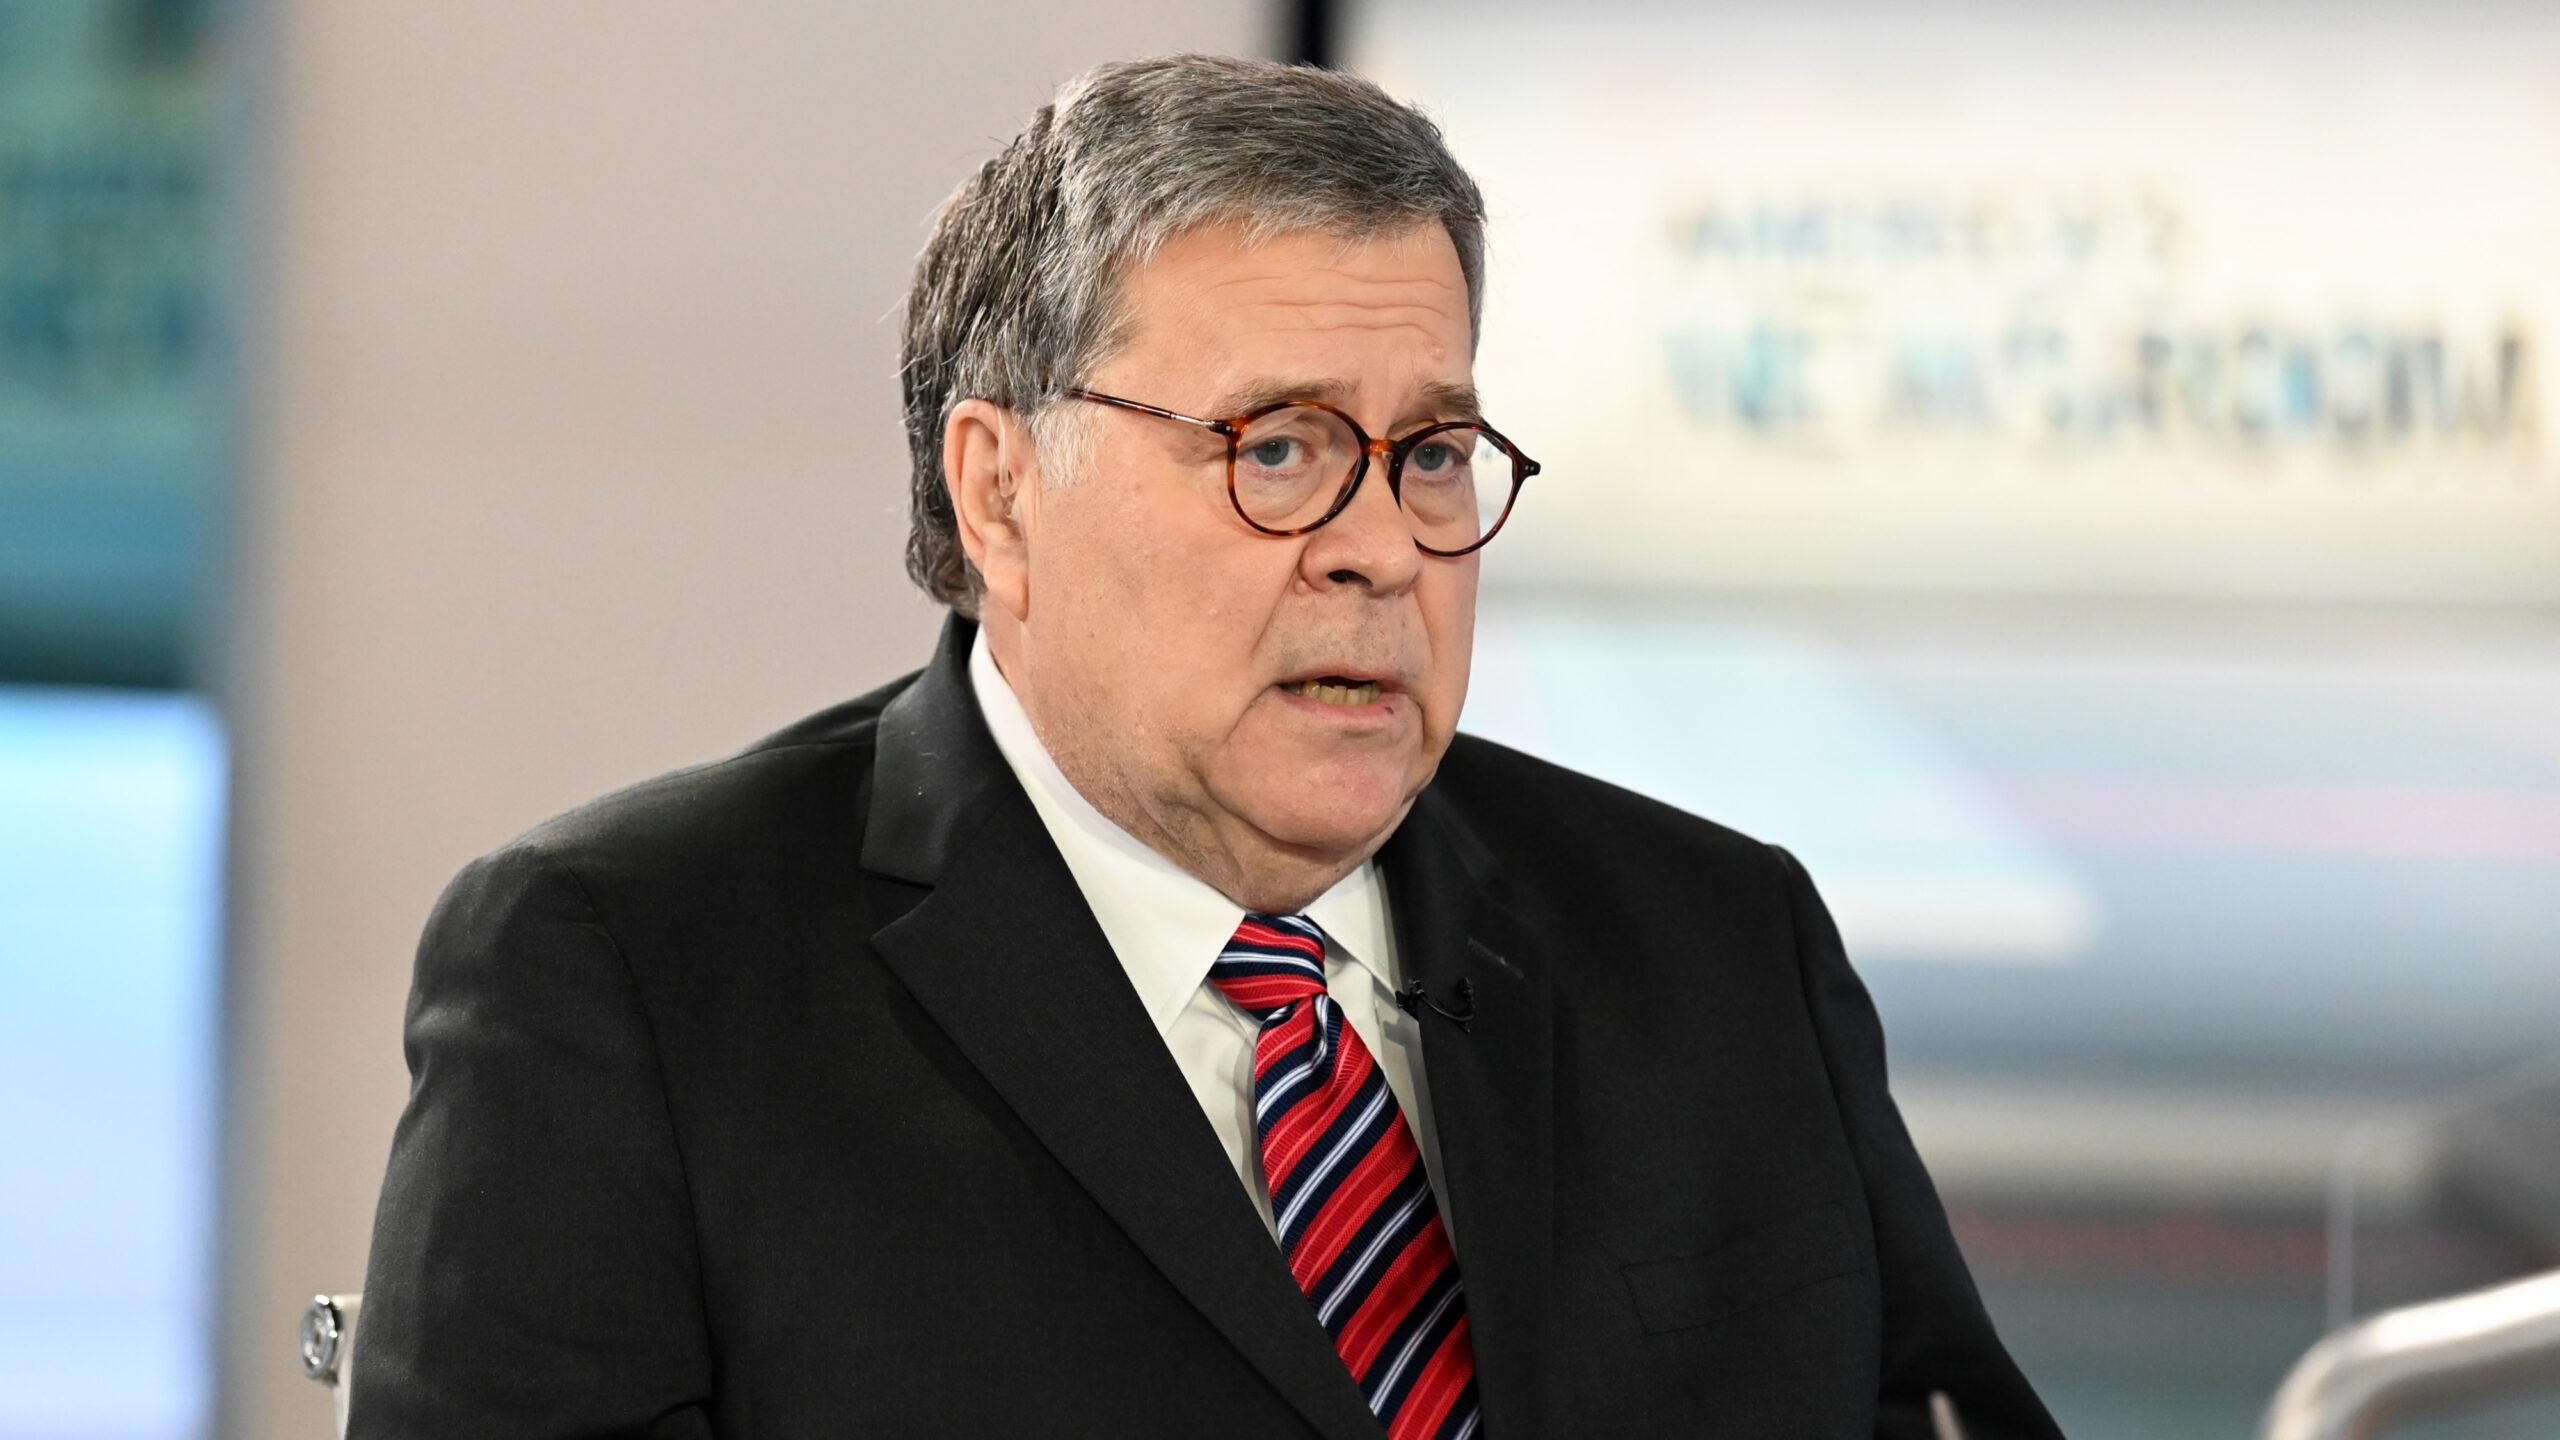 Bill Barr: Democrats Trying To Make Trump GOP Nominee By Prosecuting Him Because They Believe They Can Beat Him In General